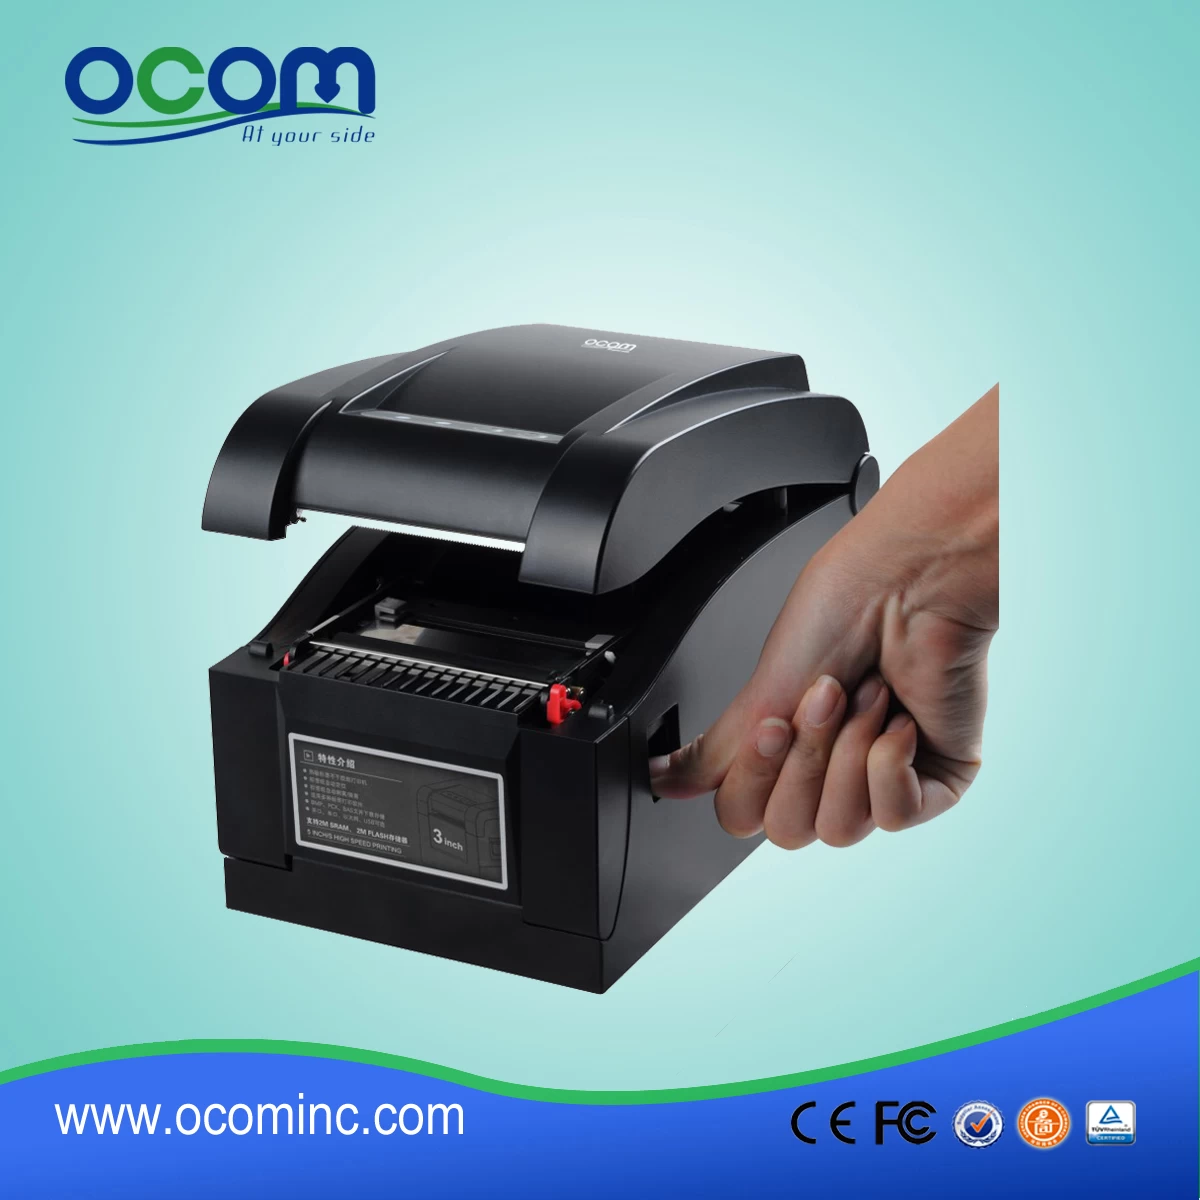 OCBP-005: Cost Competitive Airprint direct thermal barcode label printer